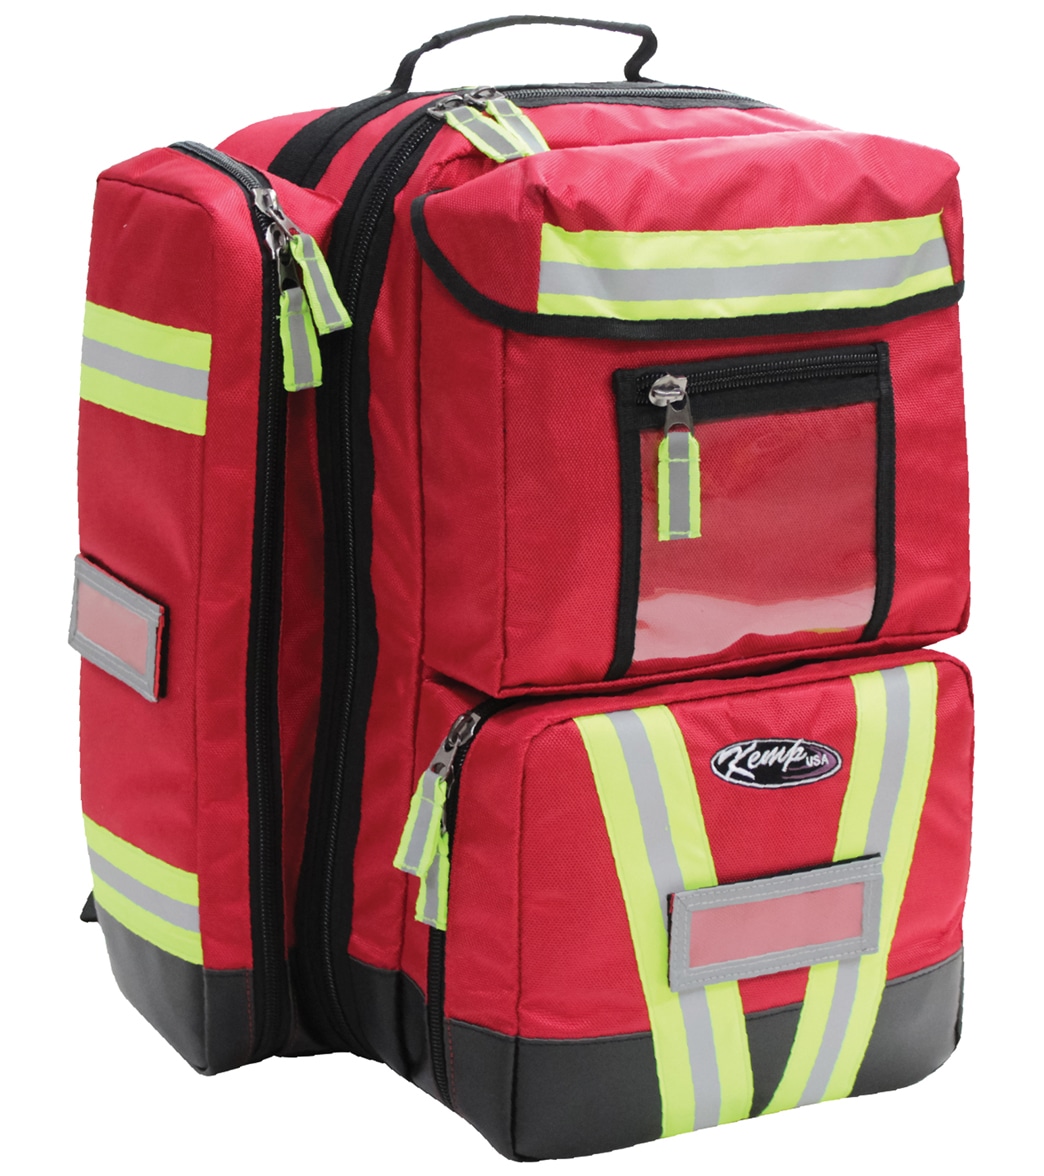 Kemp Premium Ultimate Ems Backpack - Red - Swimoutlet.com